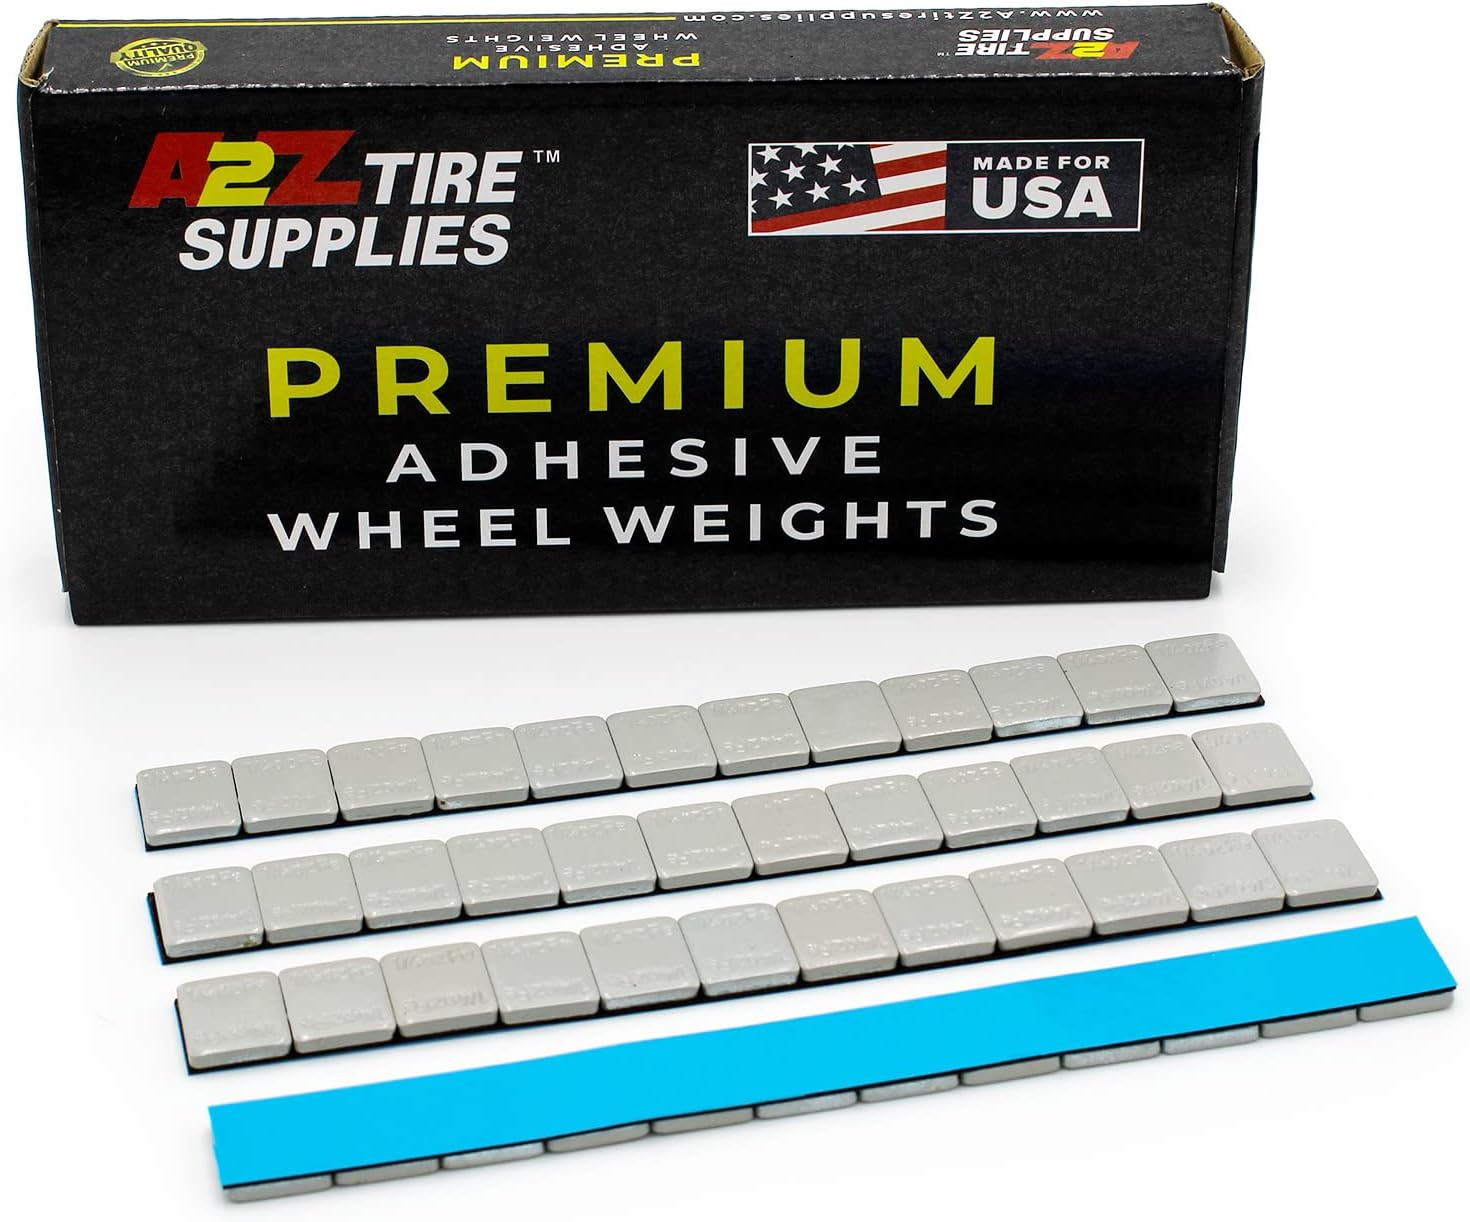 A2Z Tire Supplies 360 Pcs Grey Coated FE Low Profile Adhesive Wheel Weight 1/4oz Segments 30 Strips 6 Lbs for Car, SUV, Truck Specially Made for US Market